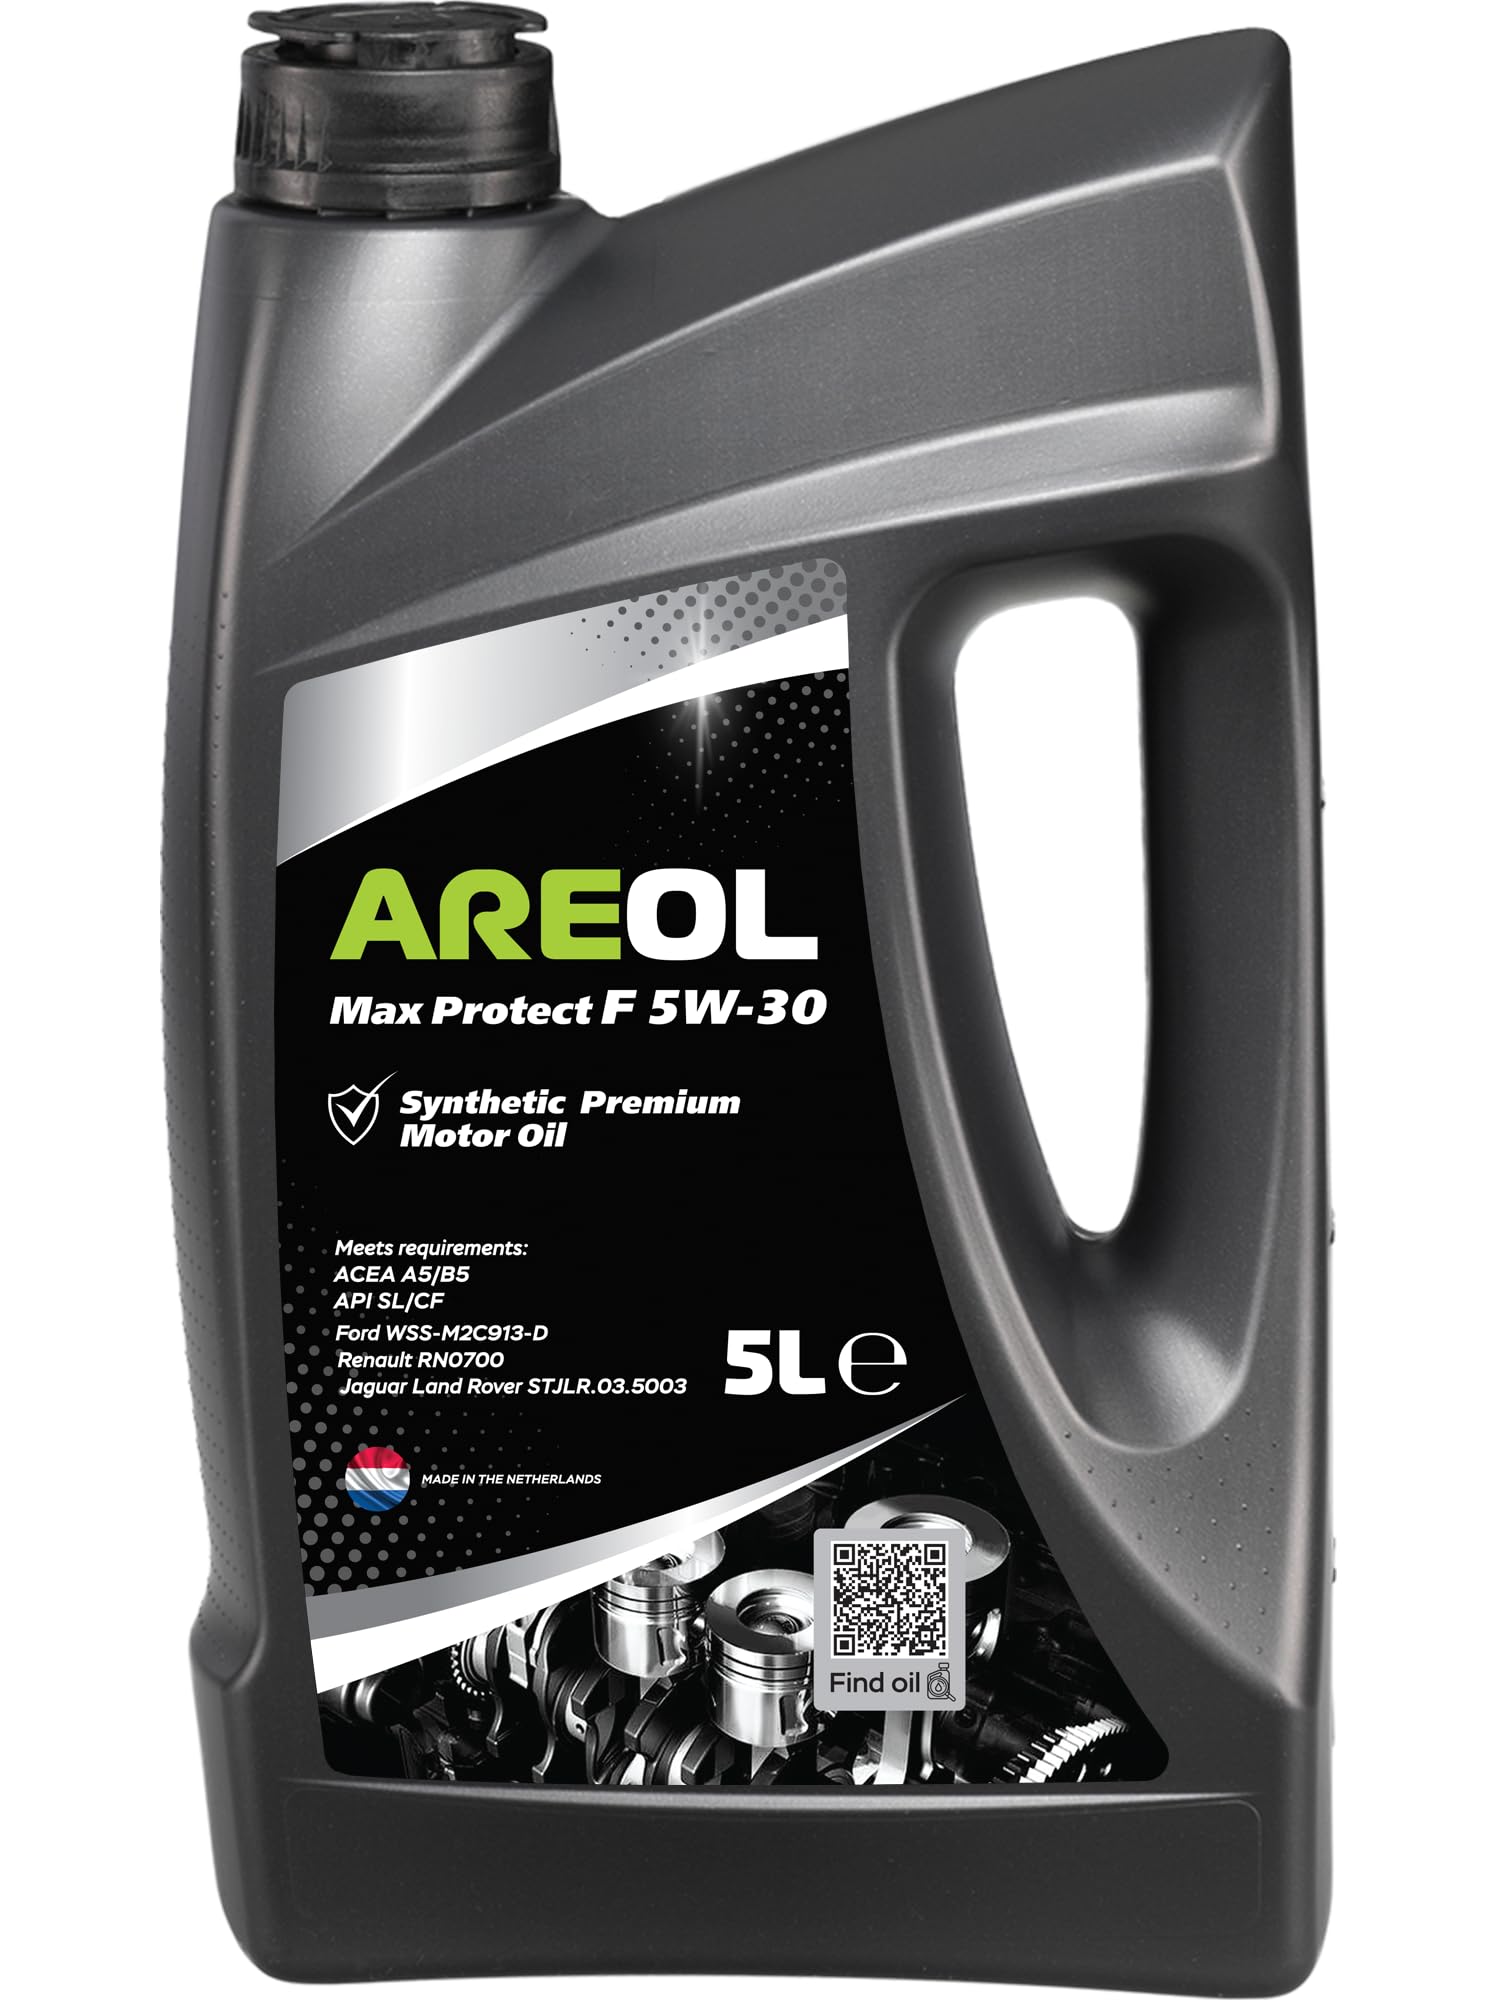 AREOL Max Protect F 5W-30 Motoröl, 5 Liter von AREOL